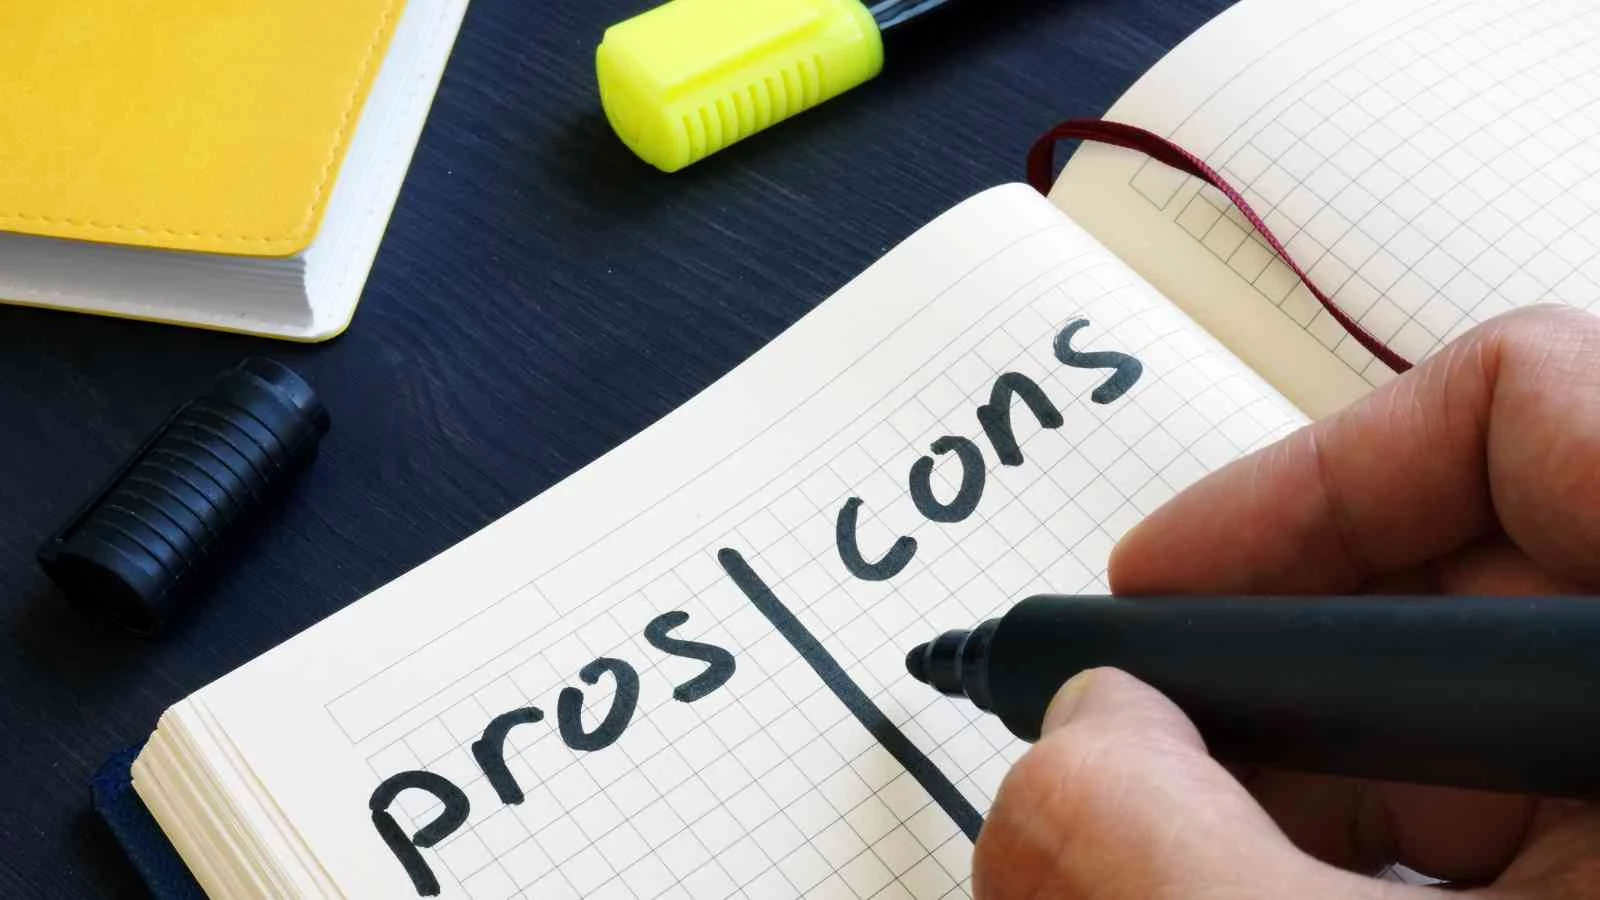 Explore the roth ira pros and cons